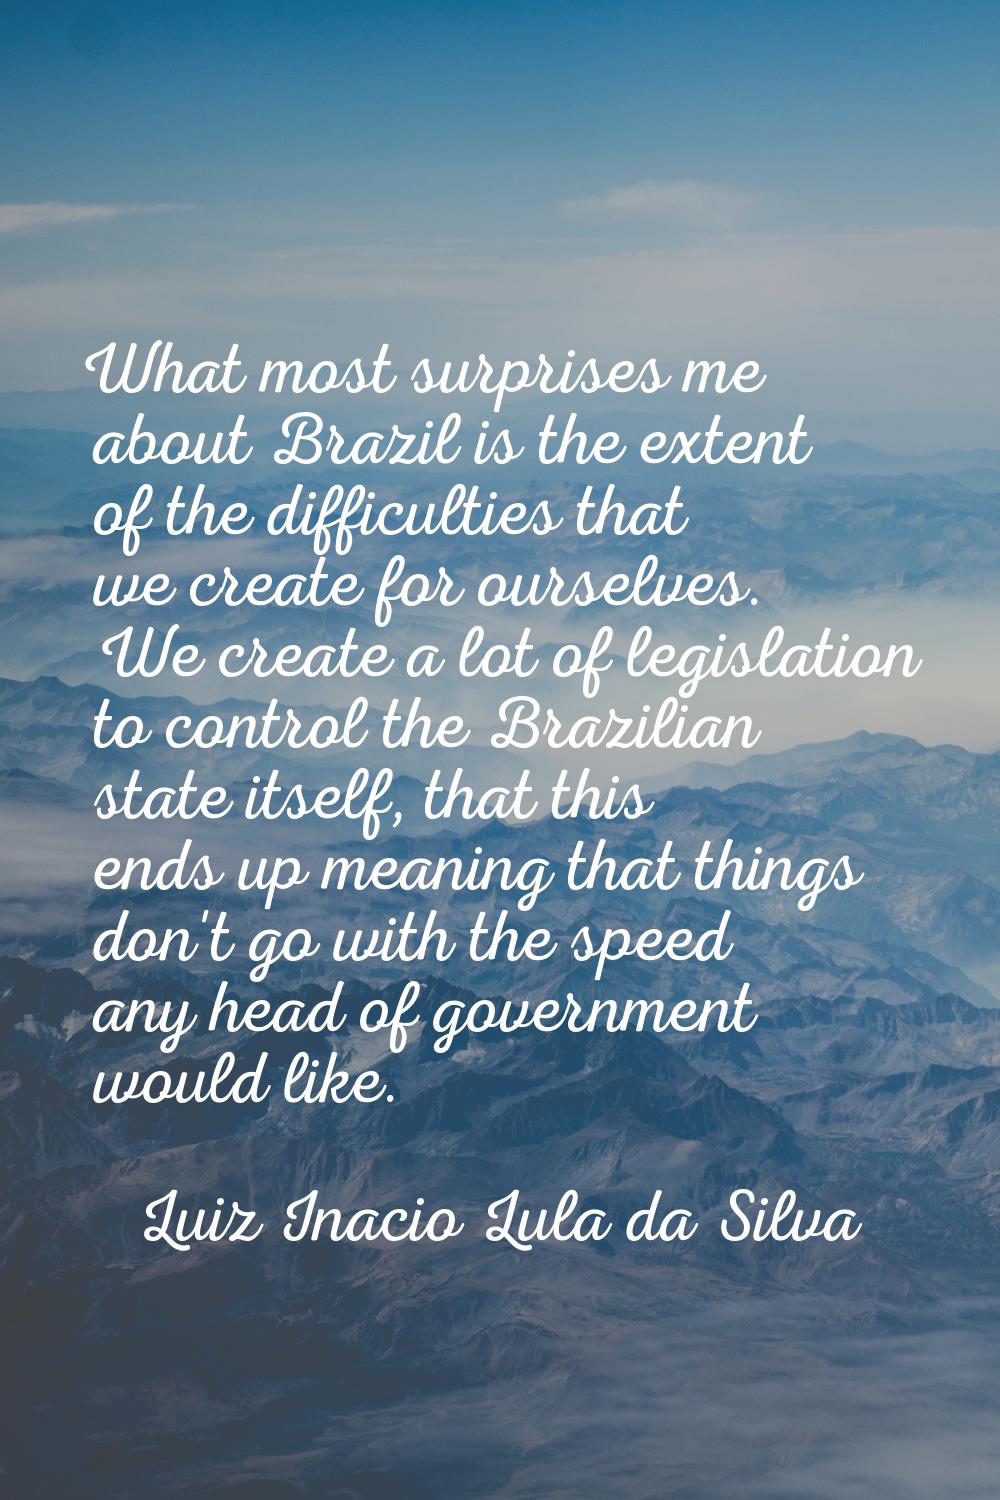 What most surprises me about Brazil is the extent of the difficulties that we create for ourselves.